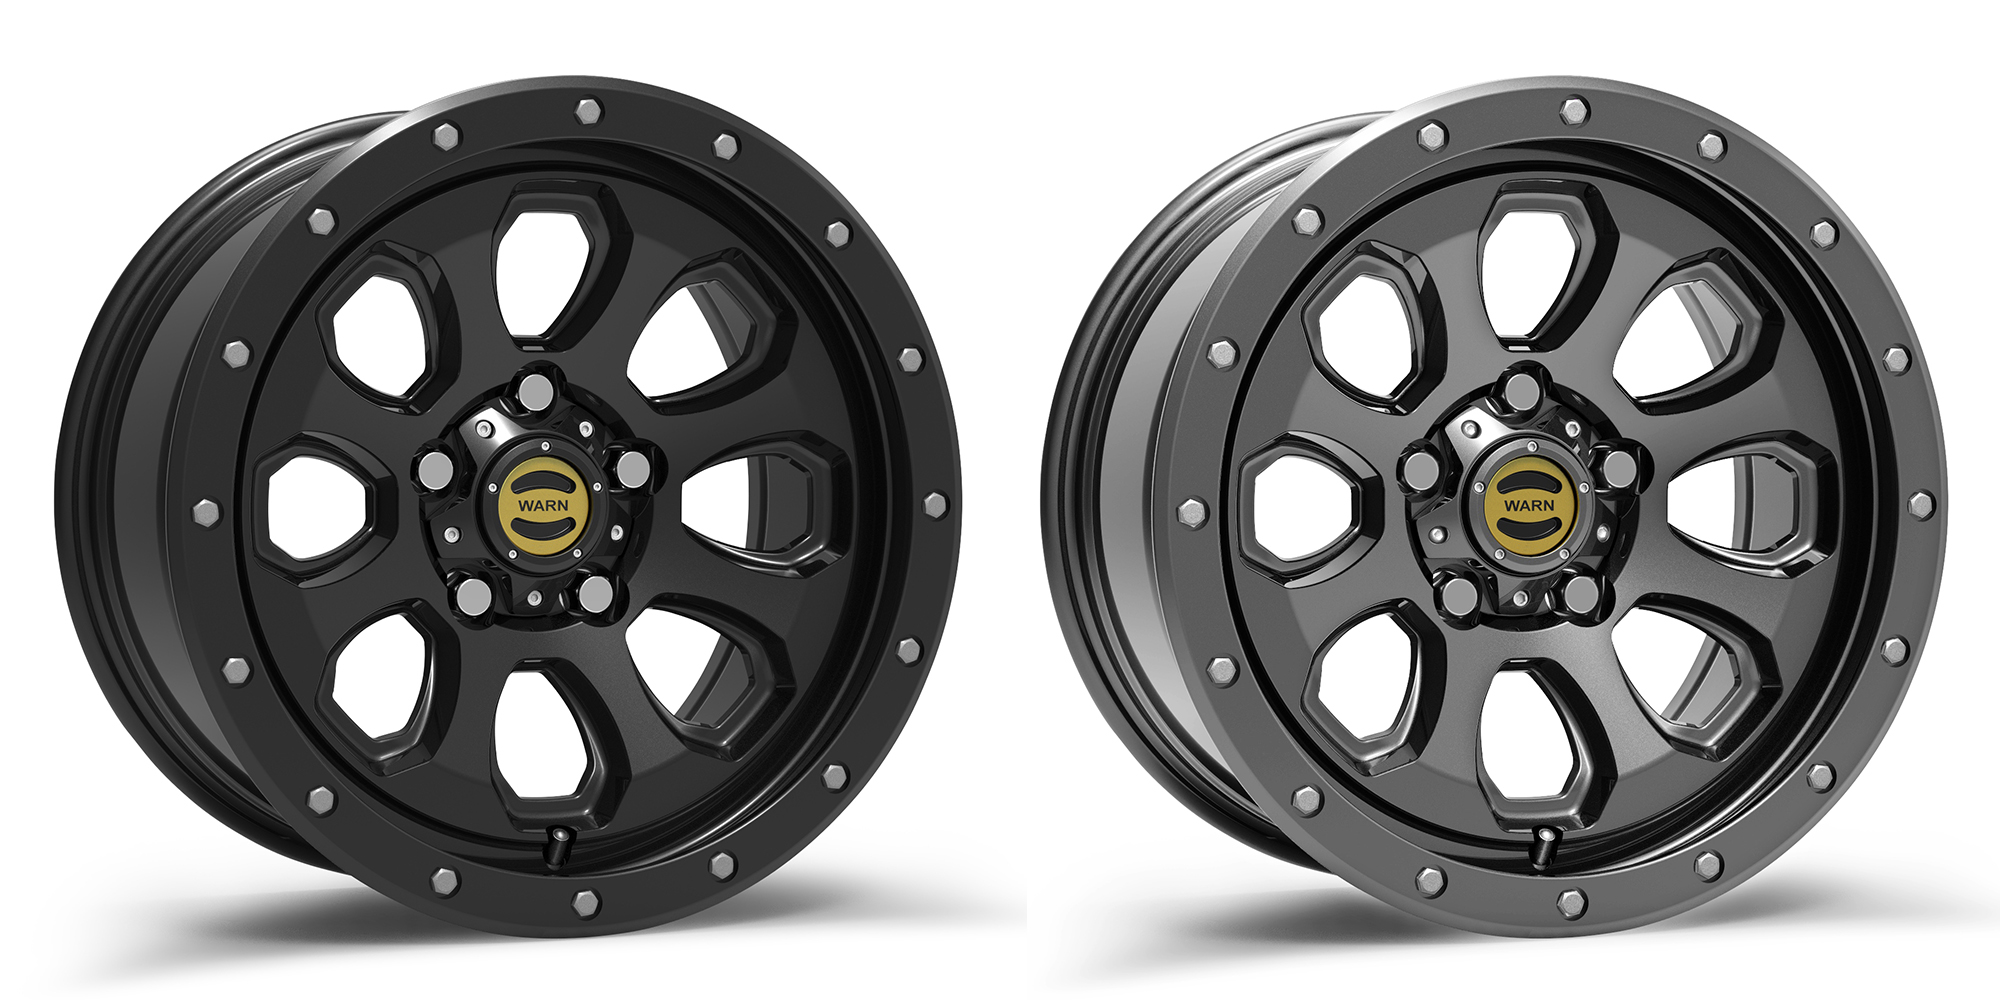 Warn (The Winch Company) Is Making Jeep Wheels And They Look Pretty Good